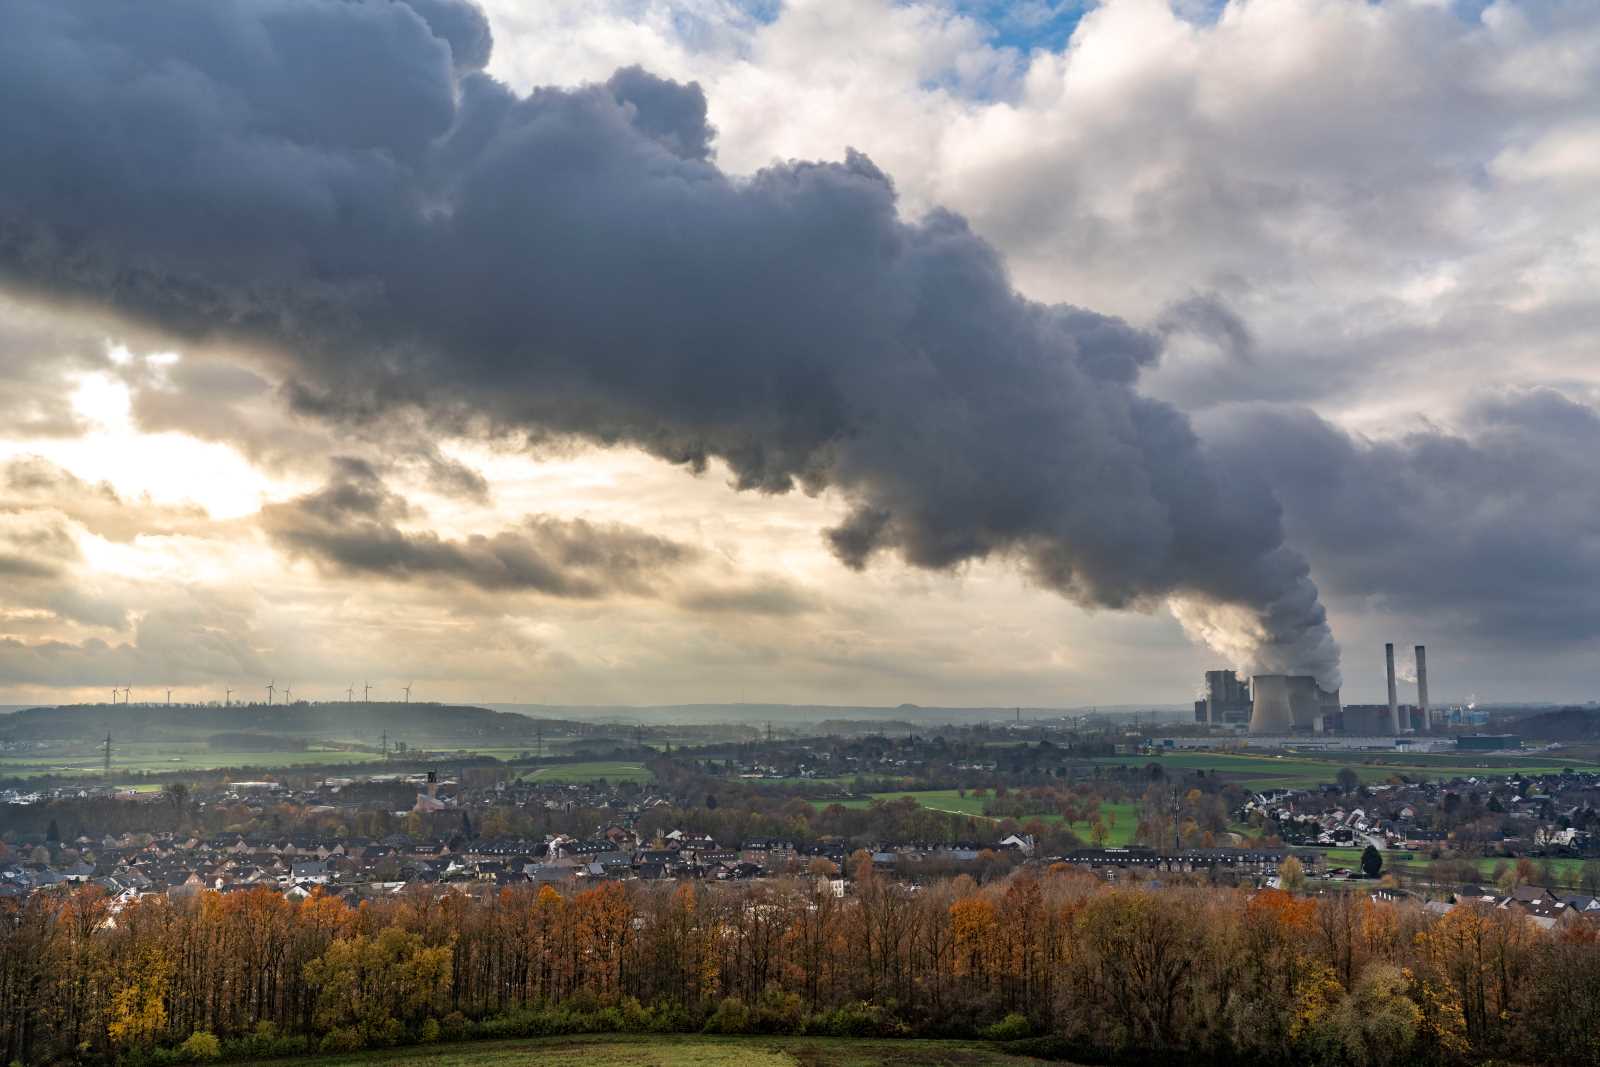 OECD members have failed to reduce carbon emissions sufficiently: coal-fired power station near Cologne. 